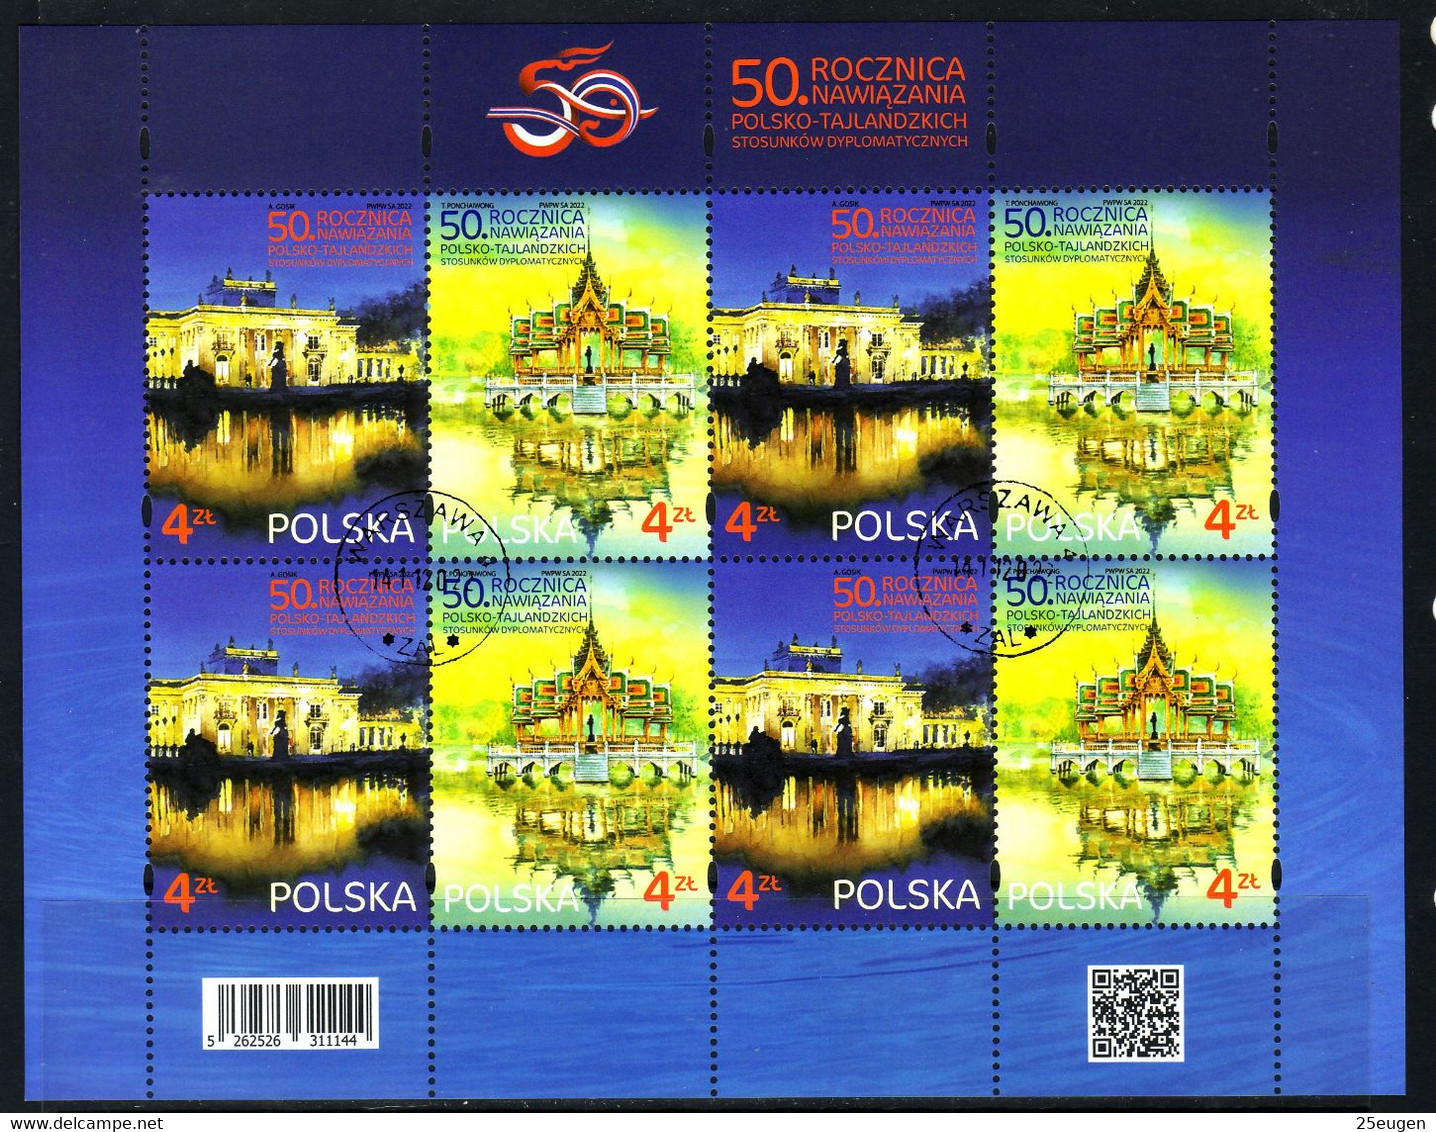 POLAND 2022 Michel No 5410 - 5411 Klbg  Used - Used Stamps